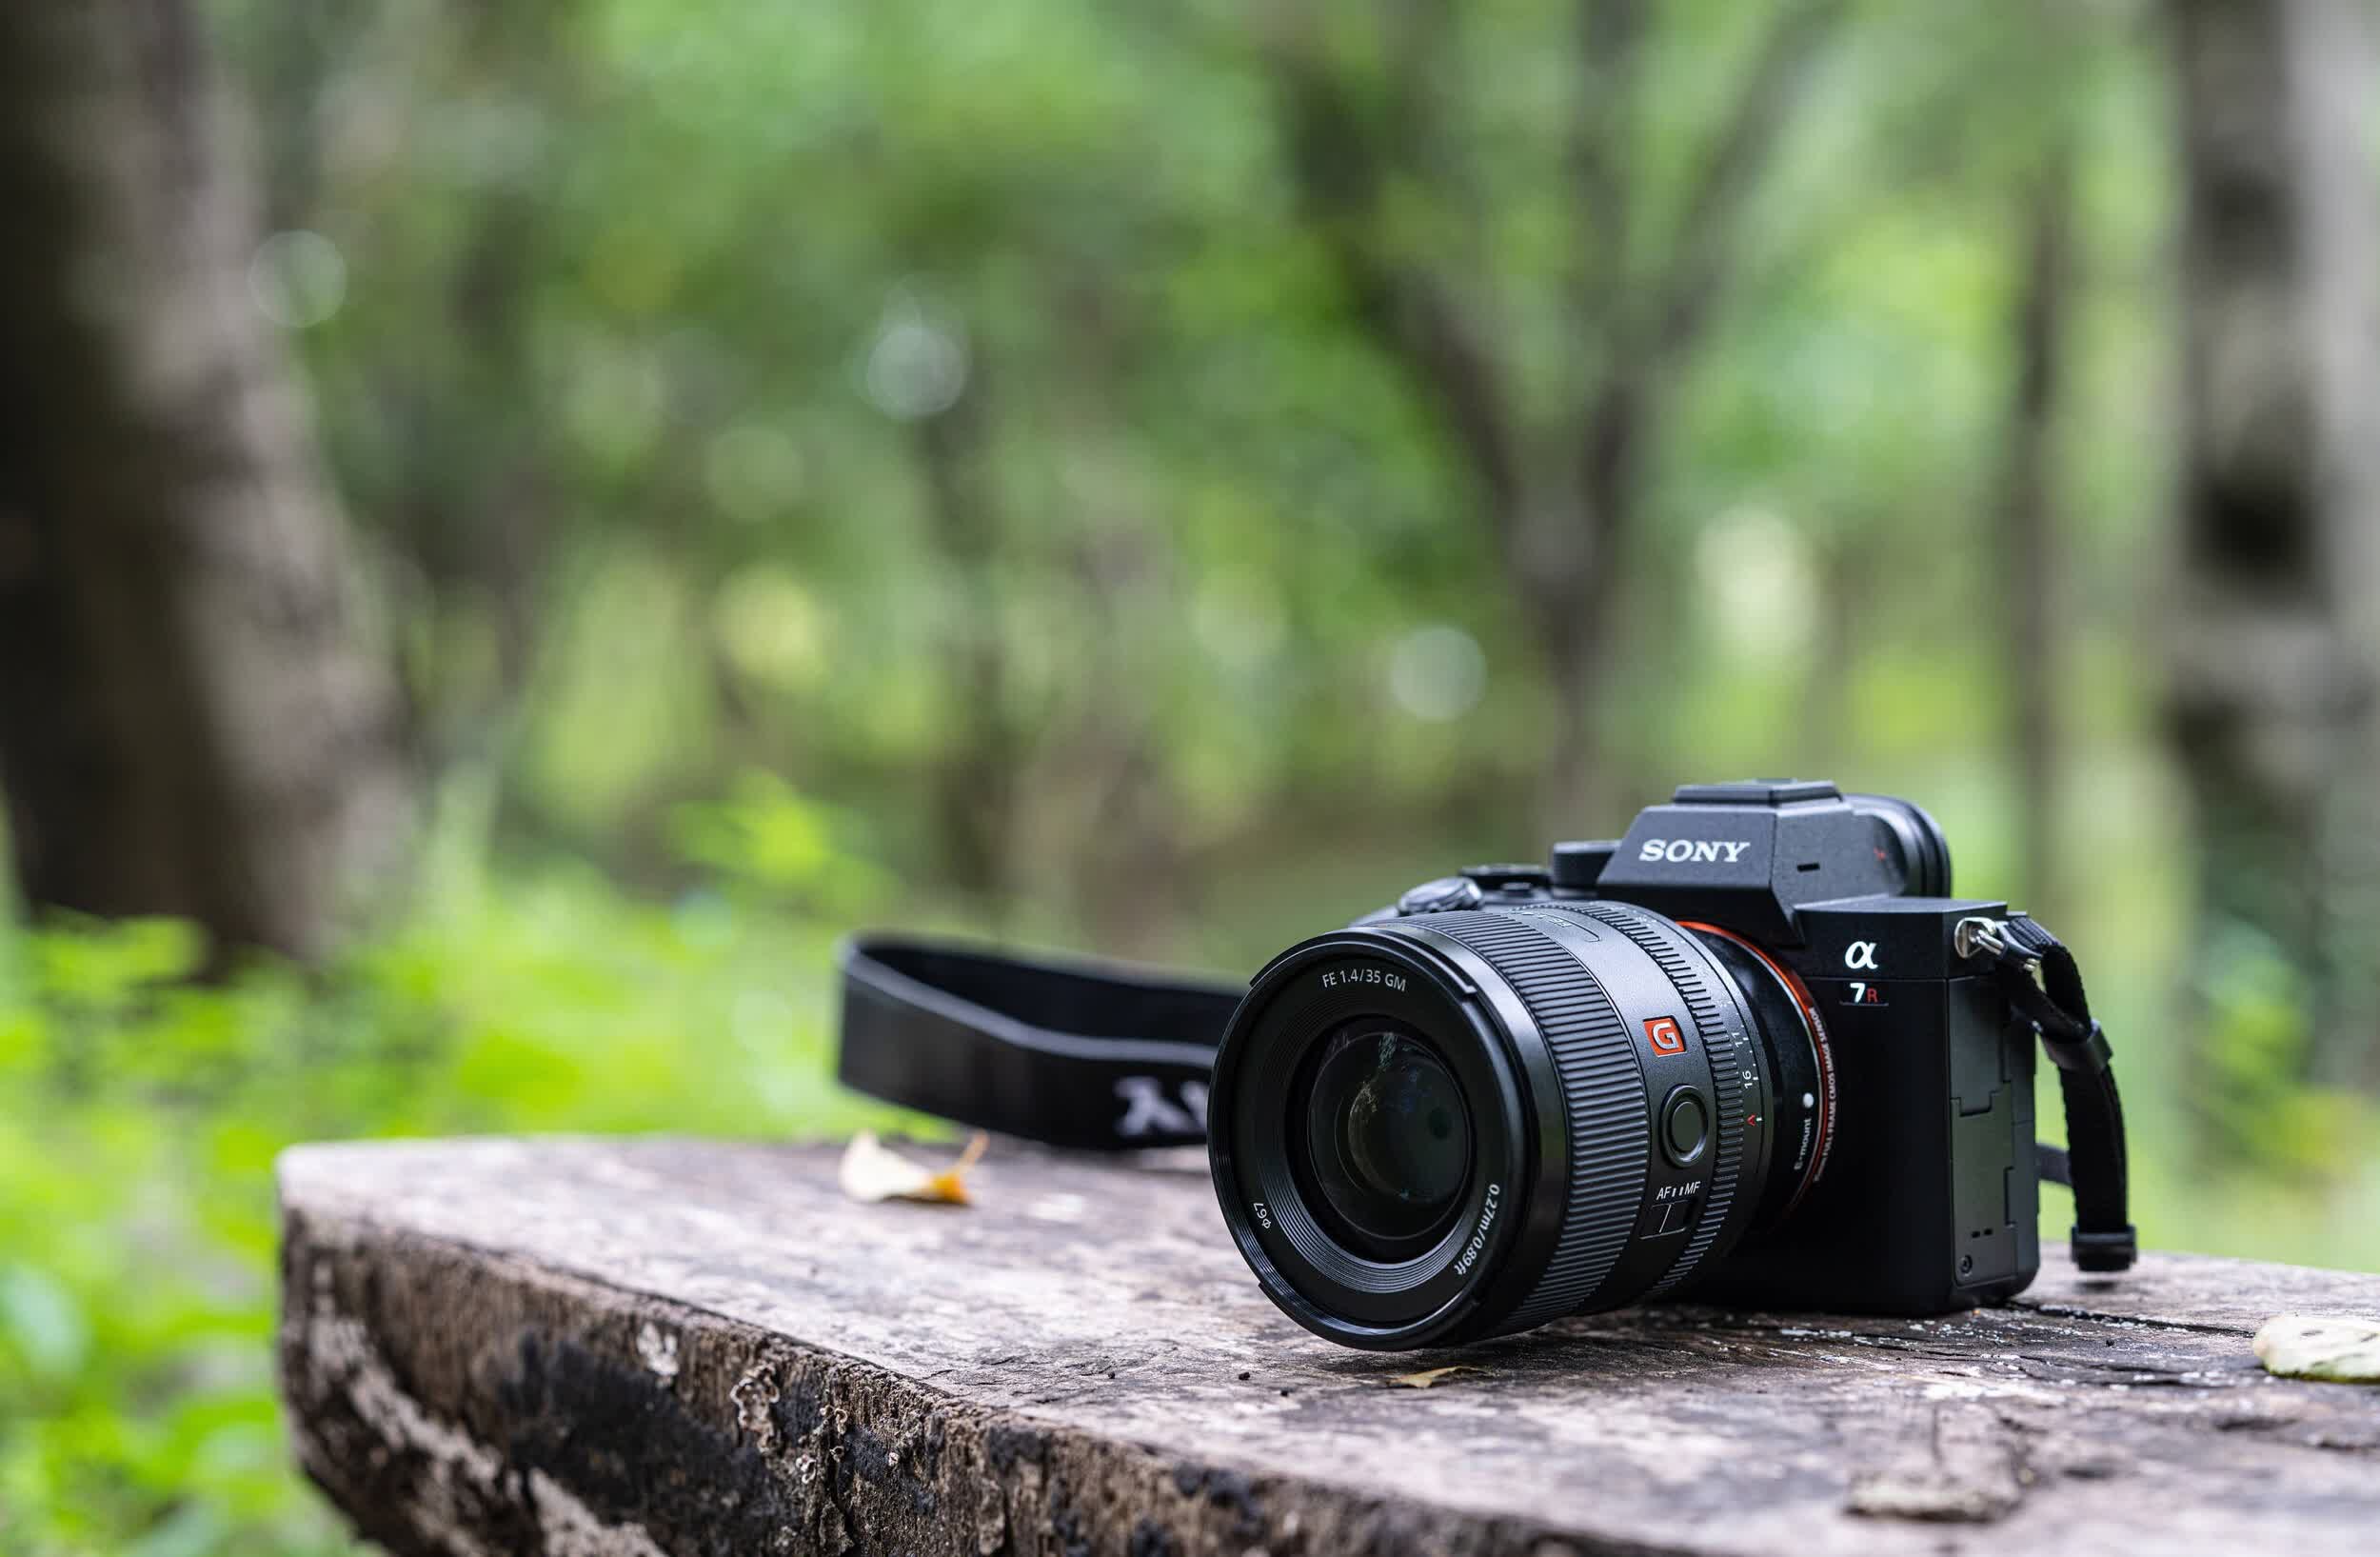 Sony goes all-in on mirrorless, discontinues its last DSLRs | TechSpot